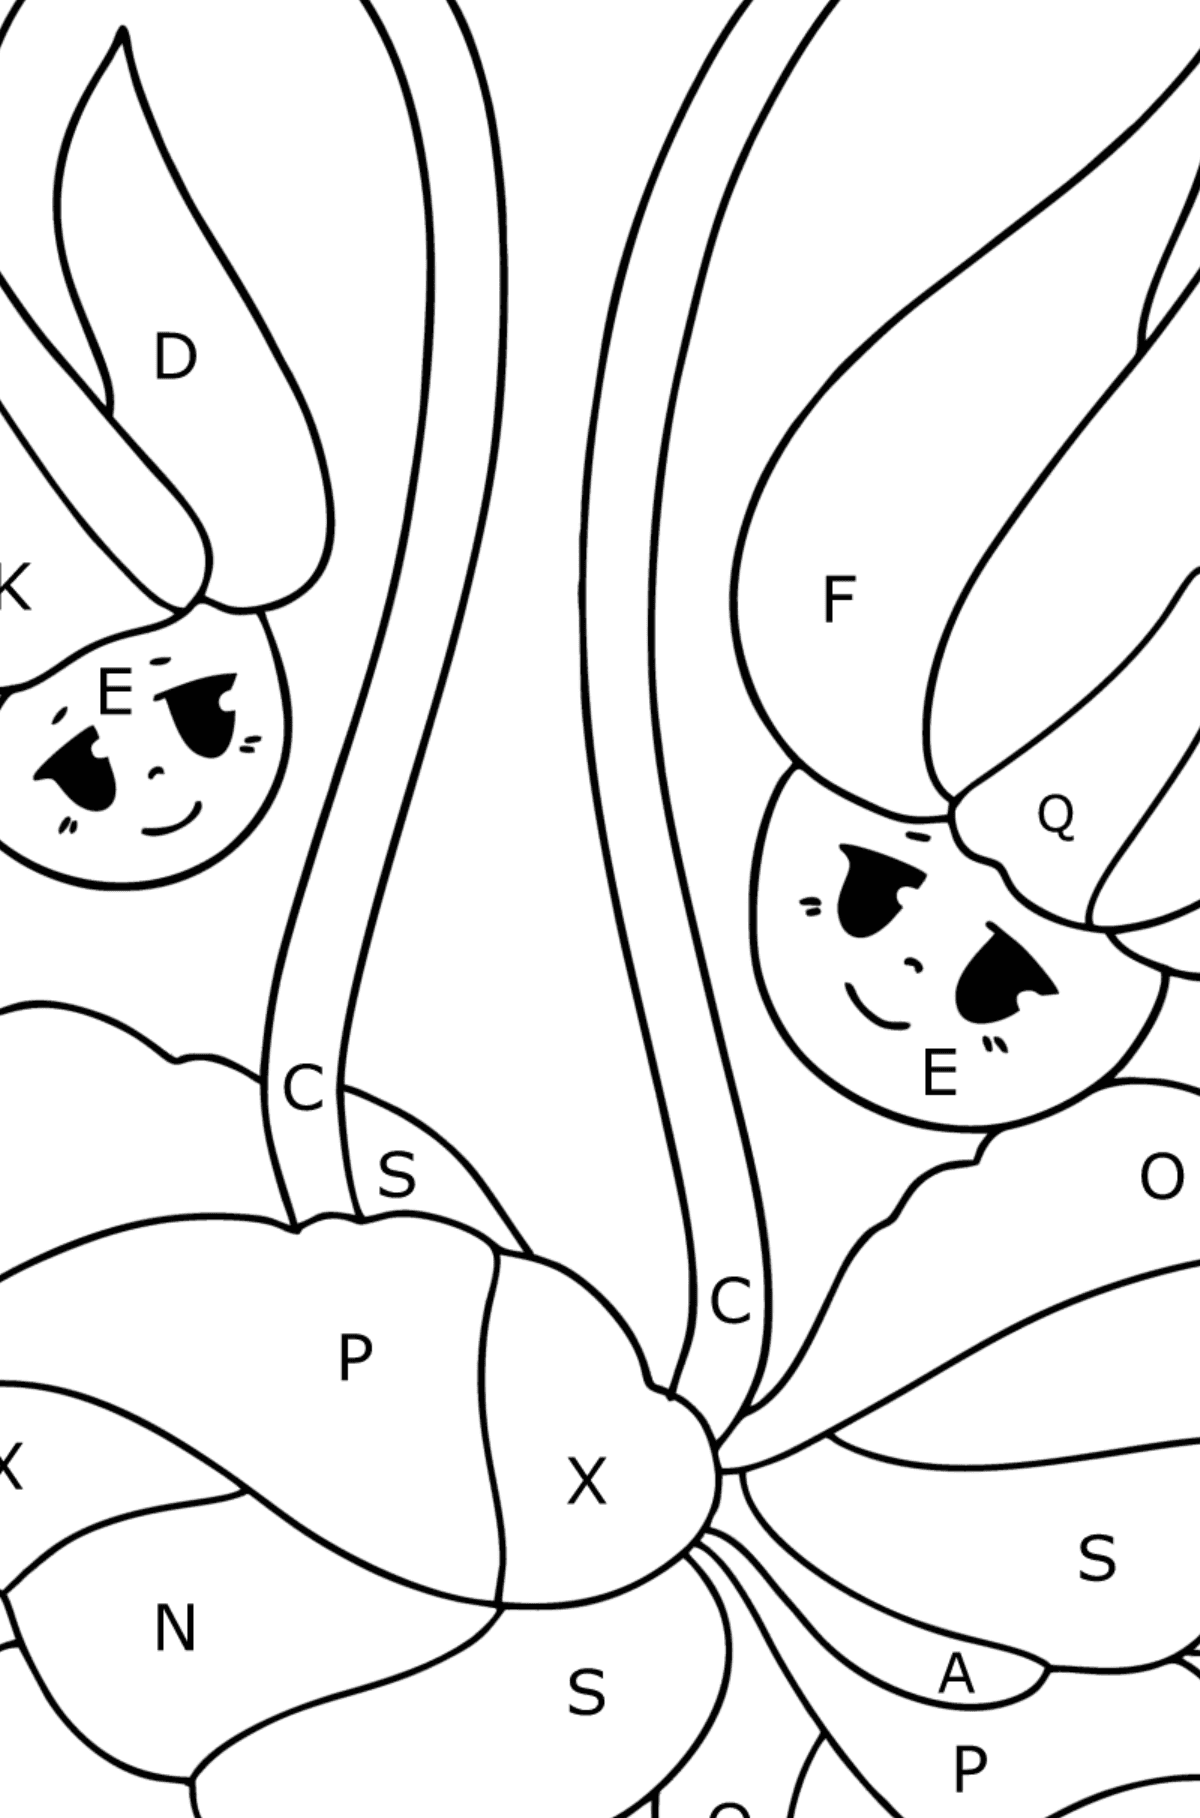 Cyclamen with eyes coloring page - Coloring by Letters for Kids